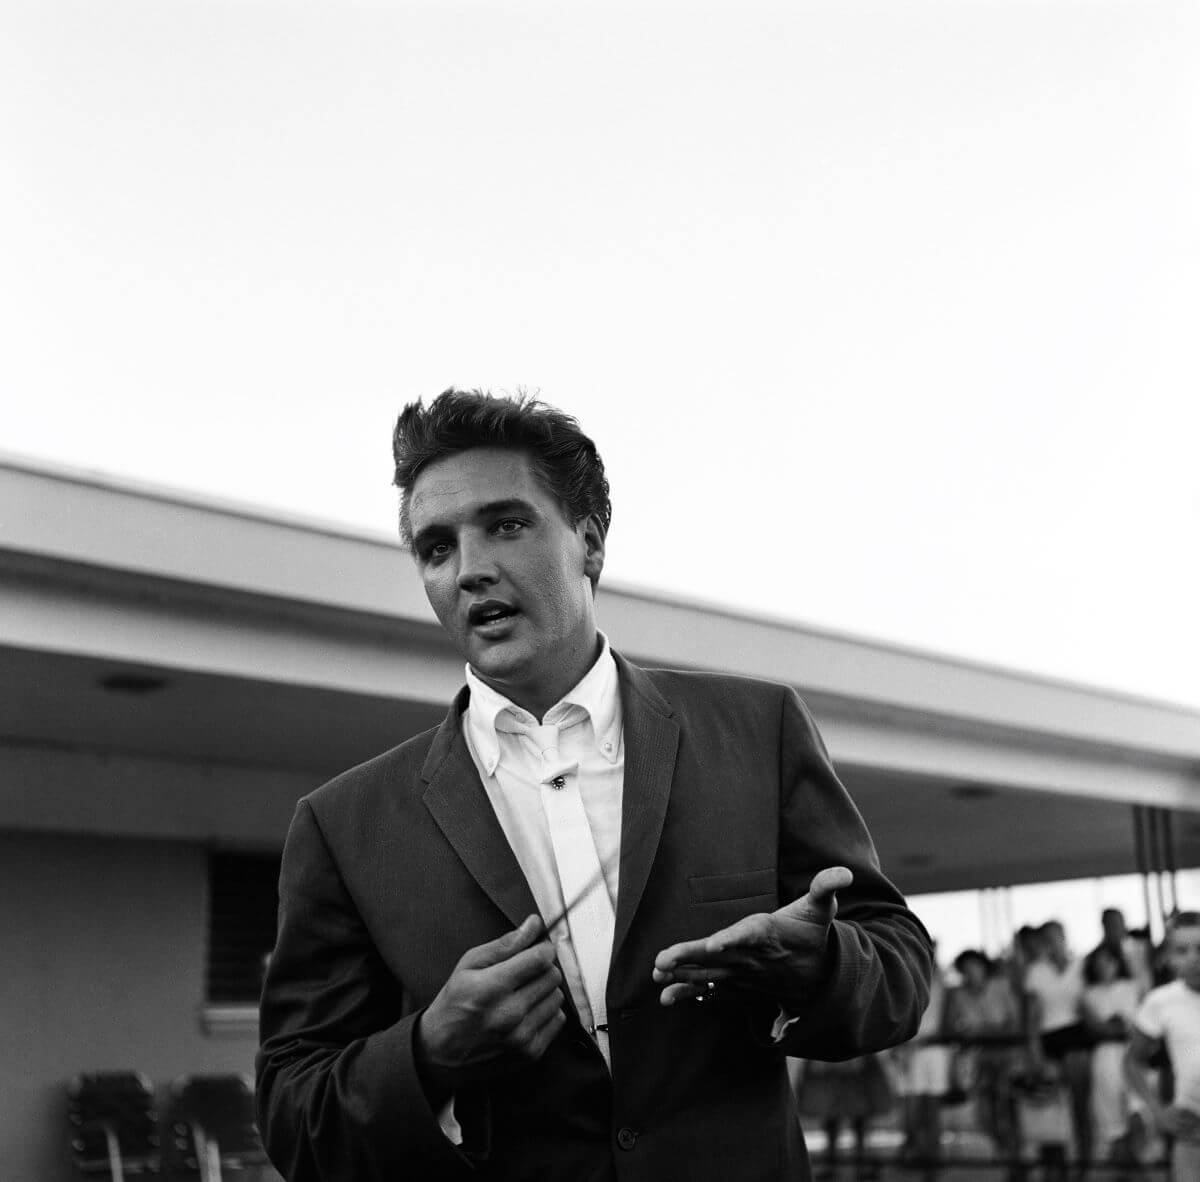 A black and white picture of Elvis Presley standing outside wearing a suit.